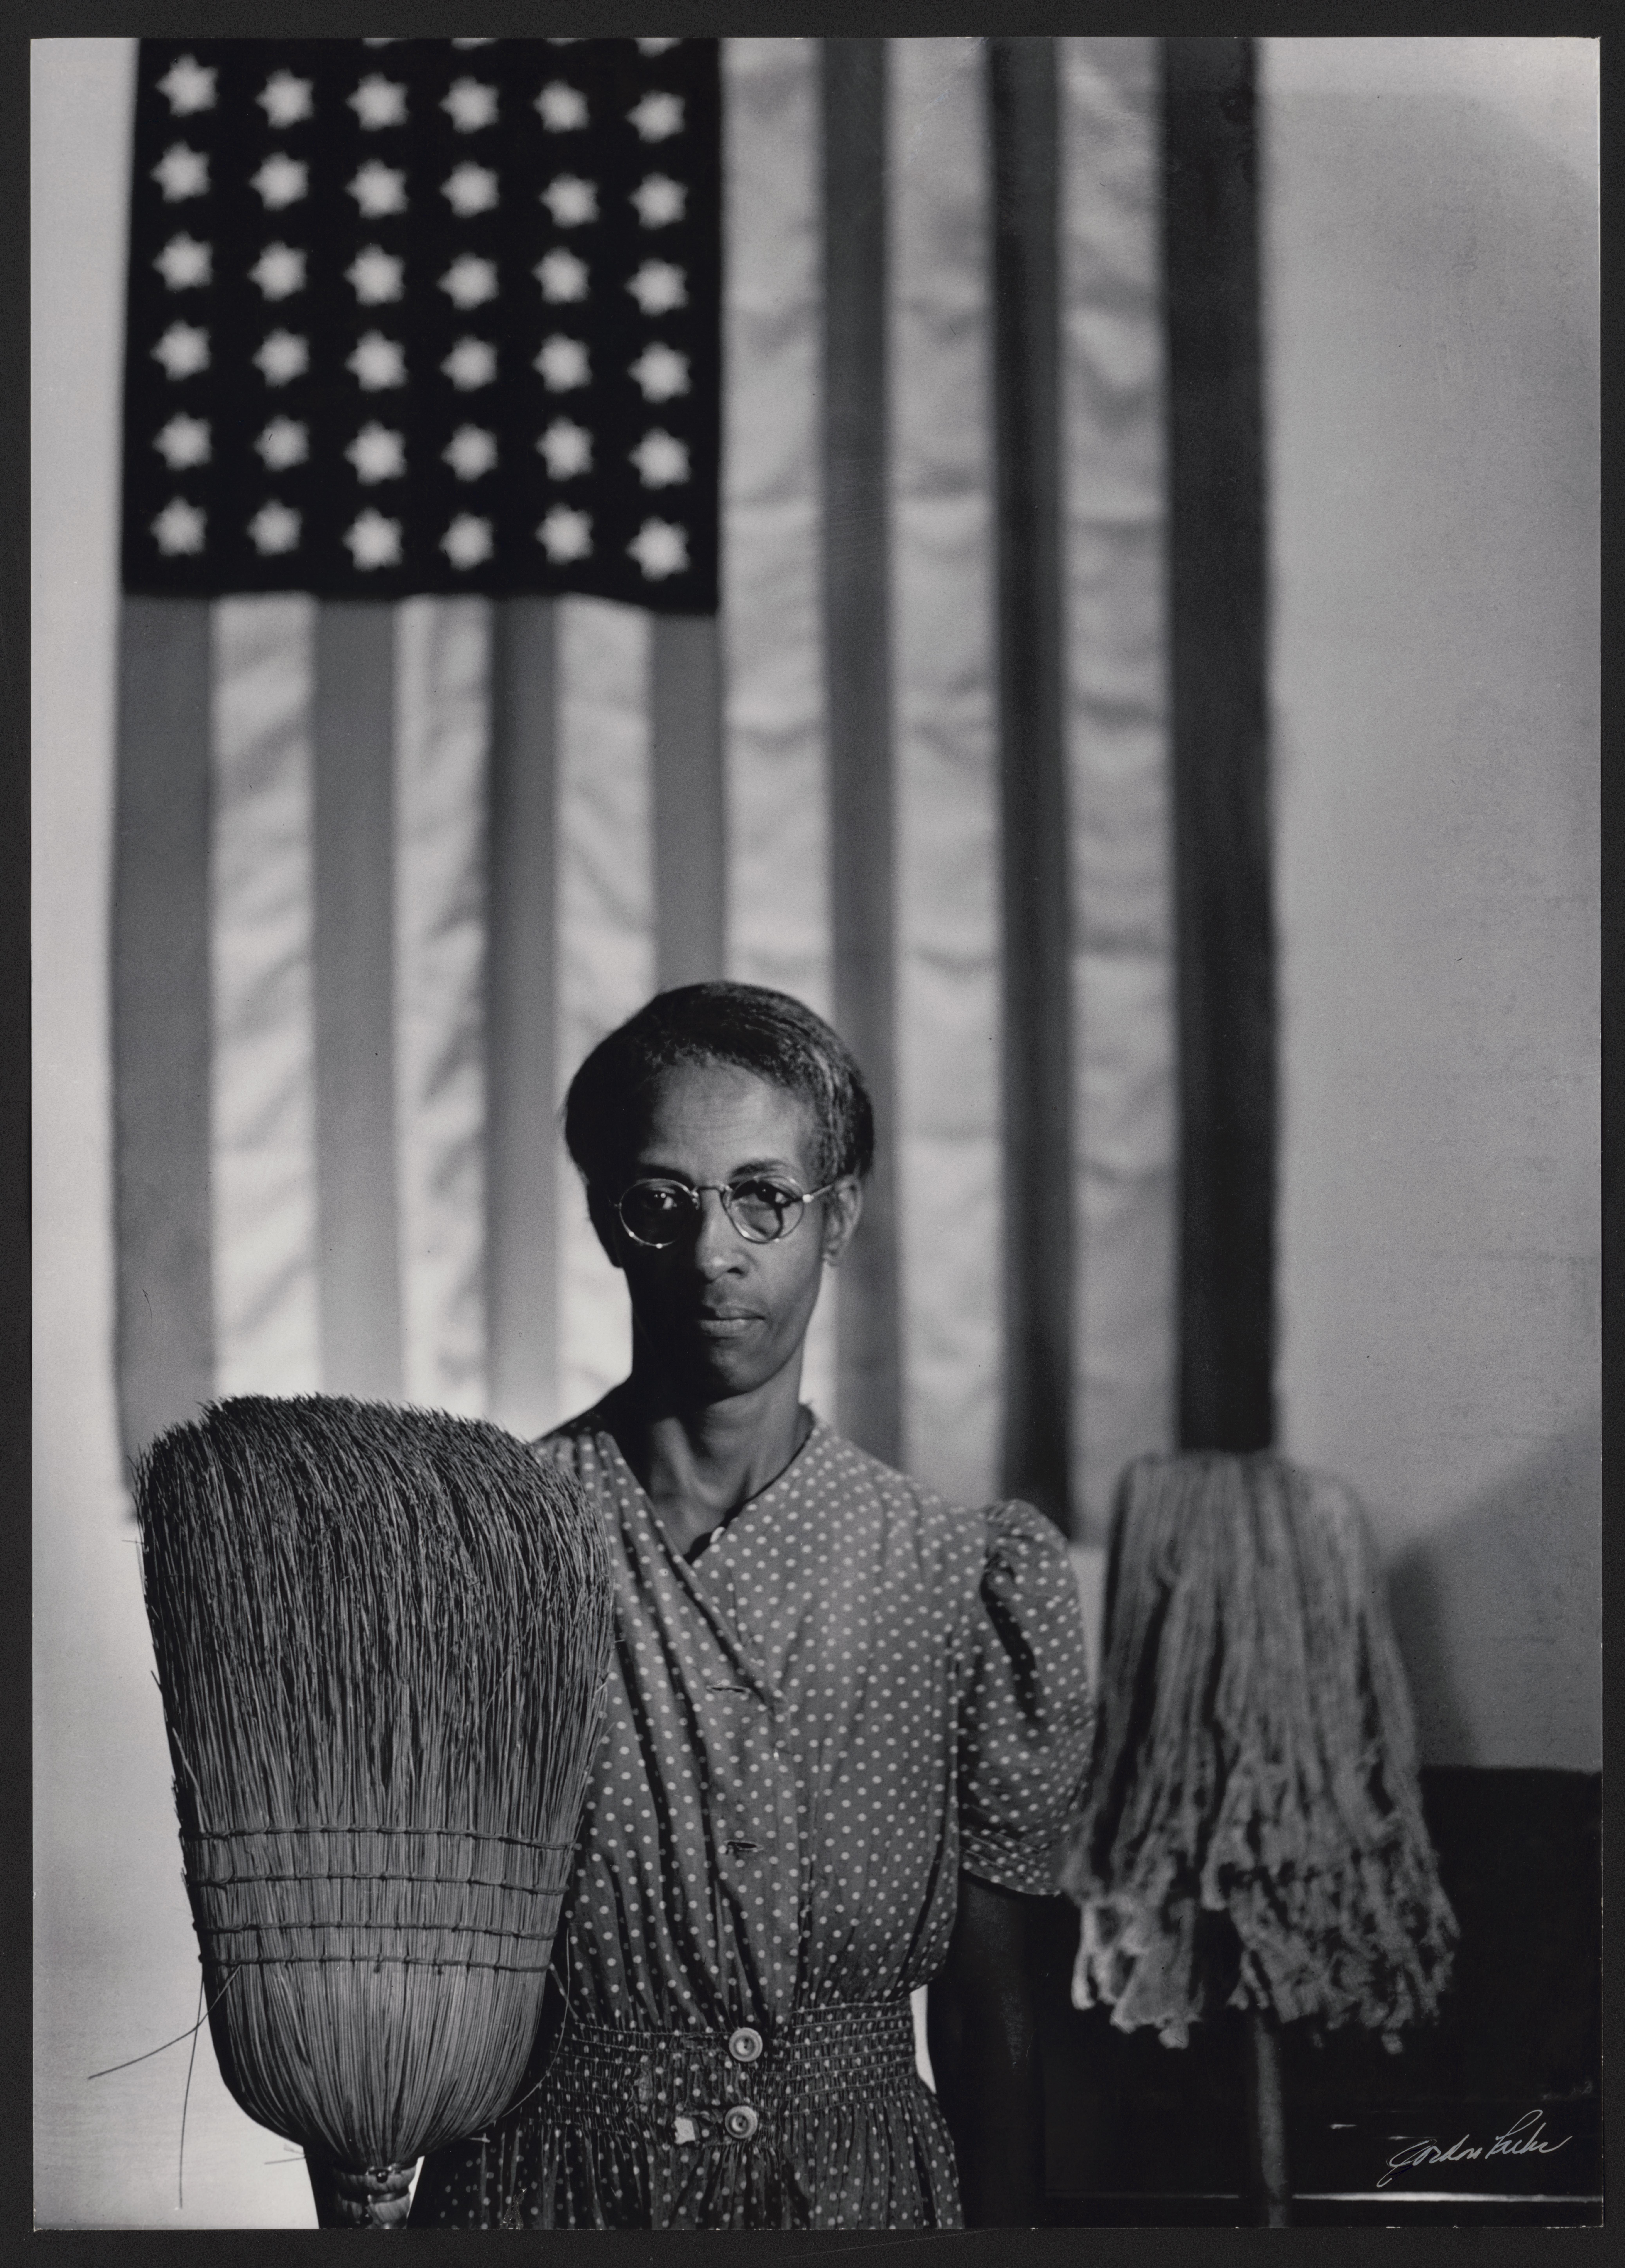 Image mimicks American Gothic, except with a single figure, a charwoman holding a broom and mop in front of an American Flag.